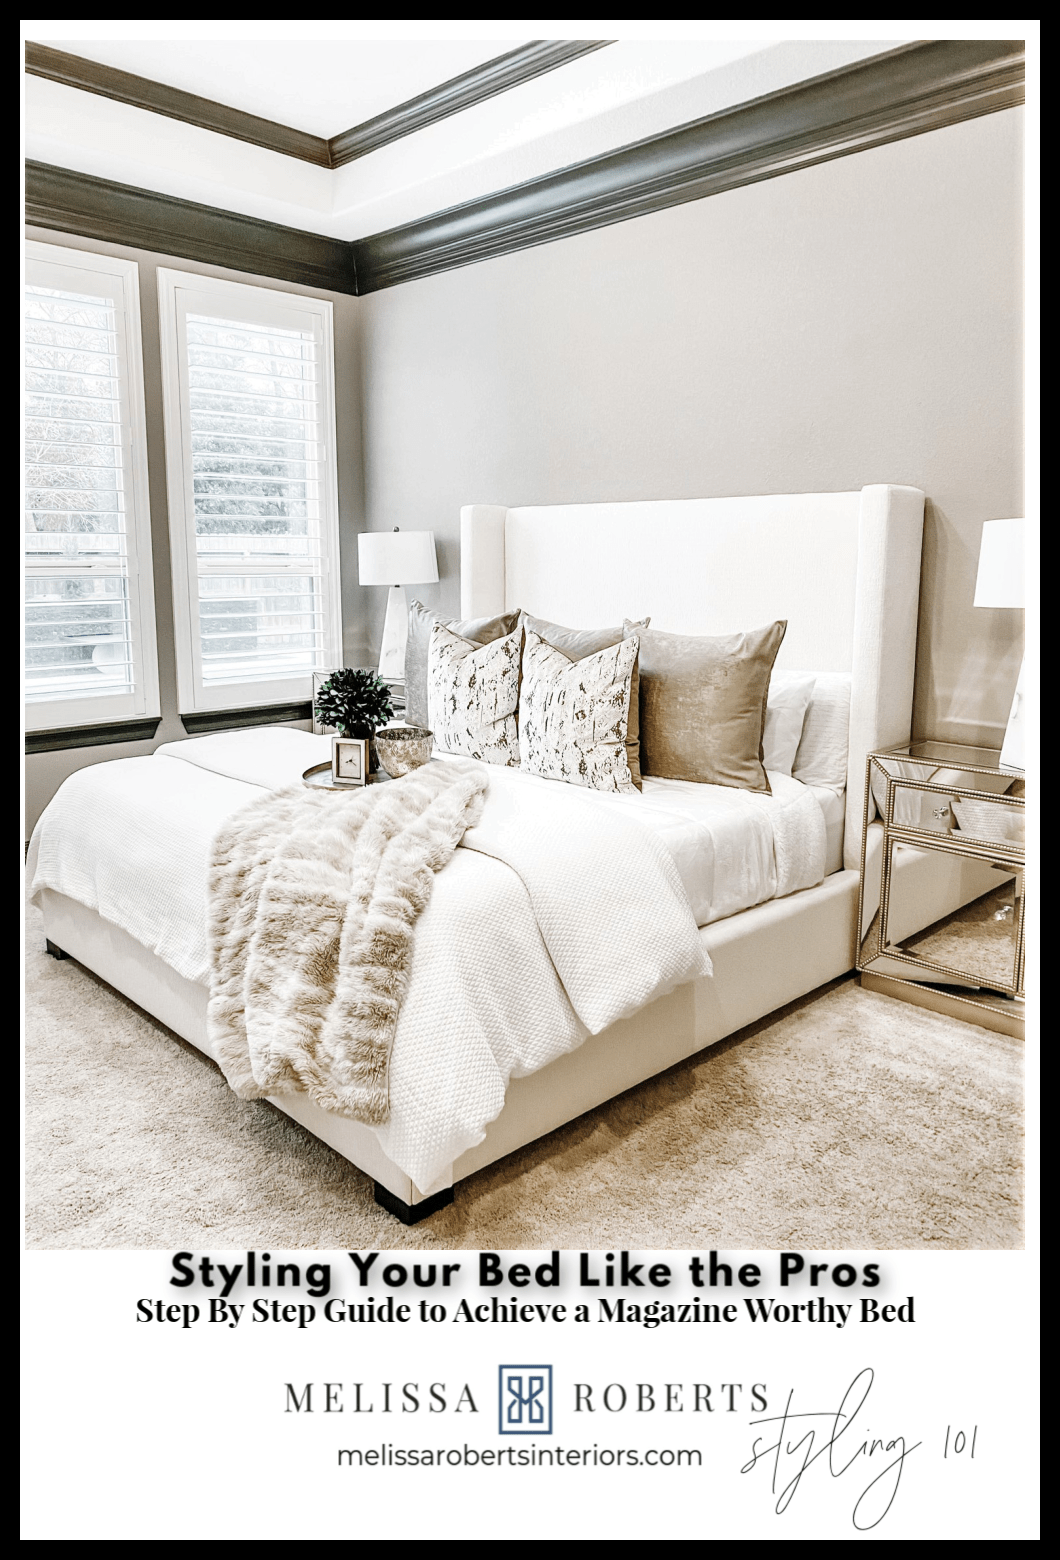 How To Style Your Bed Like A Pro Melissa Roberts Interior Design